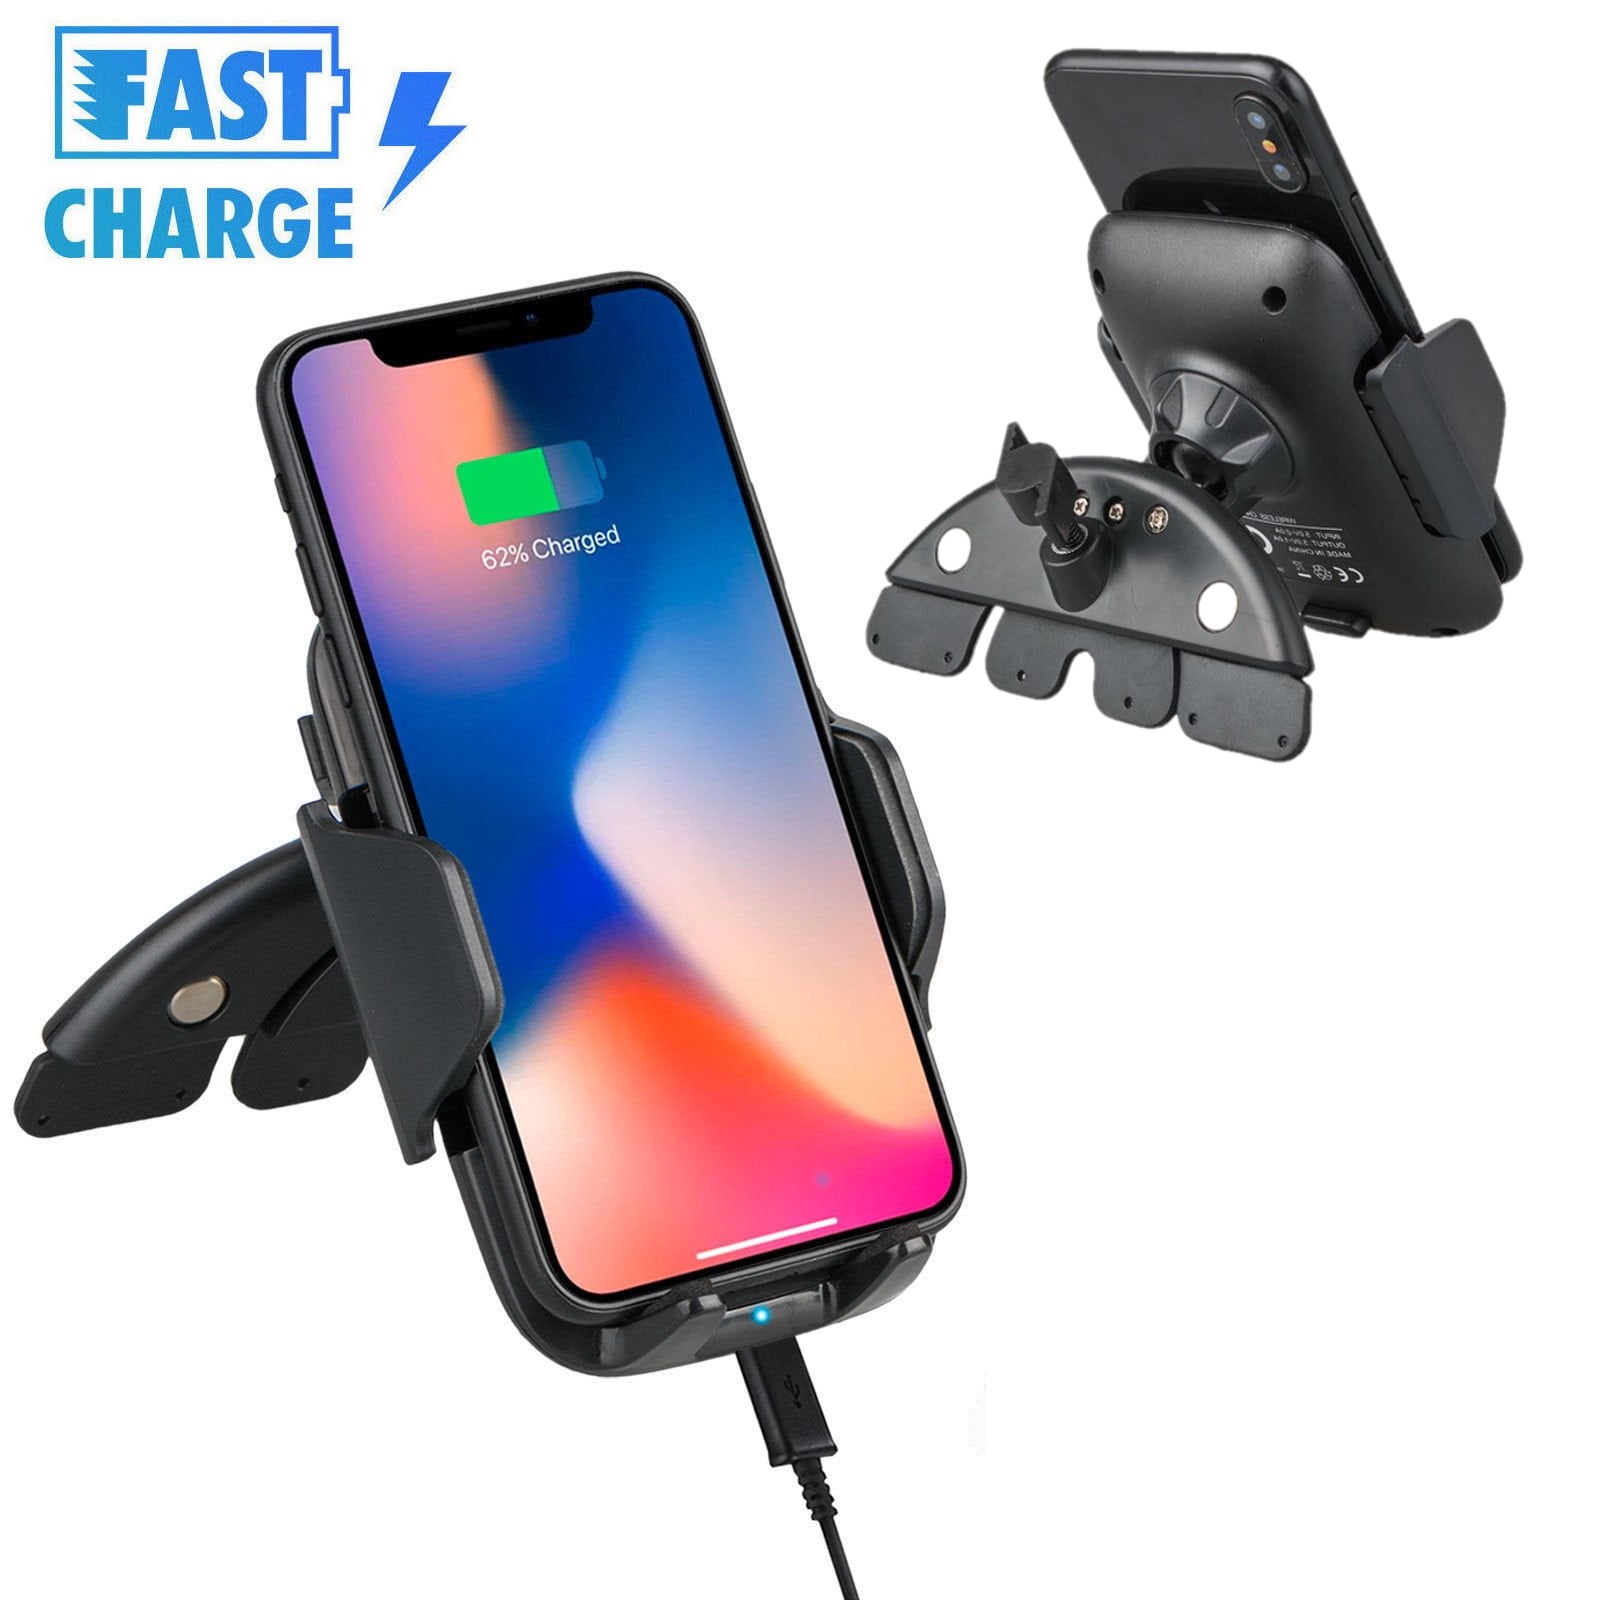 10W FAST Qi Wireless Charger Car Holder Stand For iPhone X 8 Plus Samsung S8 S9 